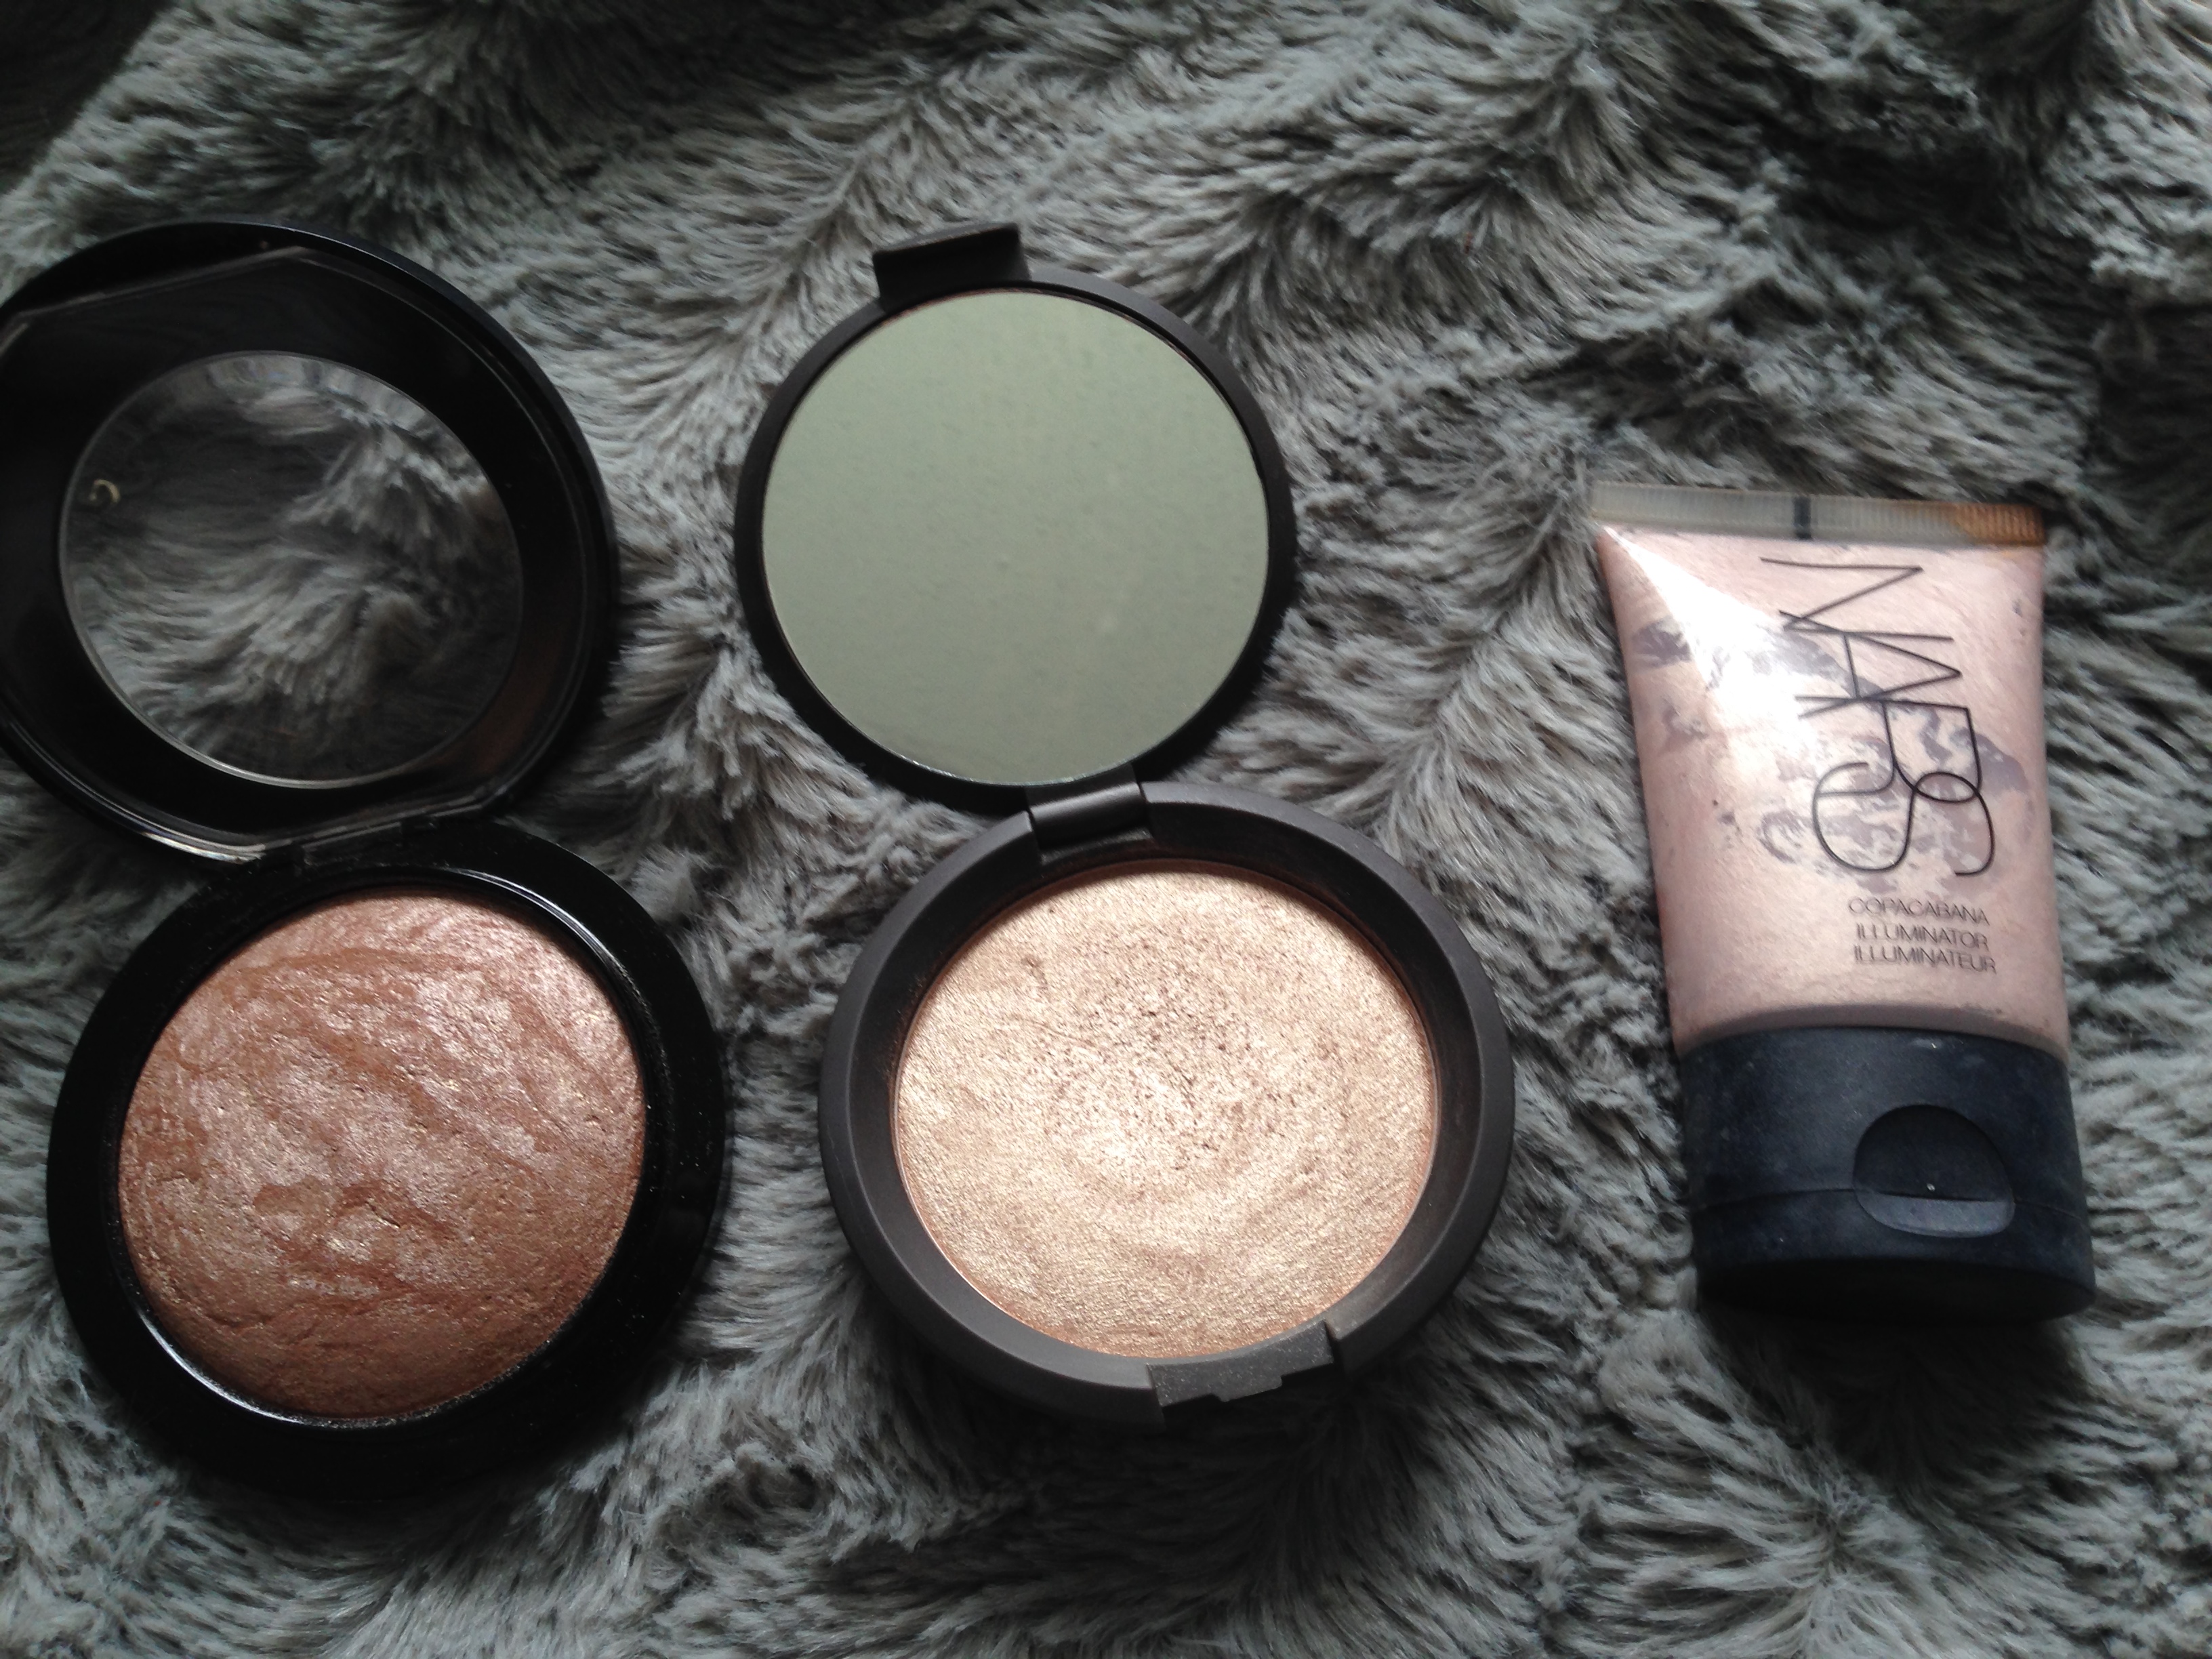 Nars, Becca, and MAC Hilighters: A Review – before you roll